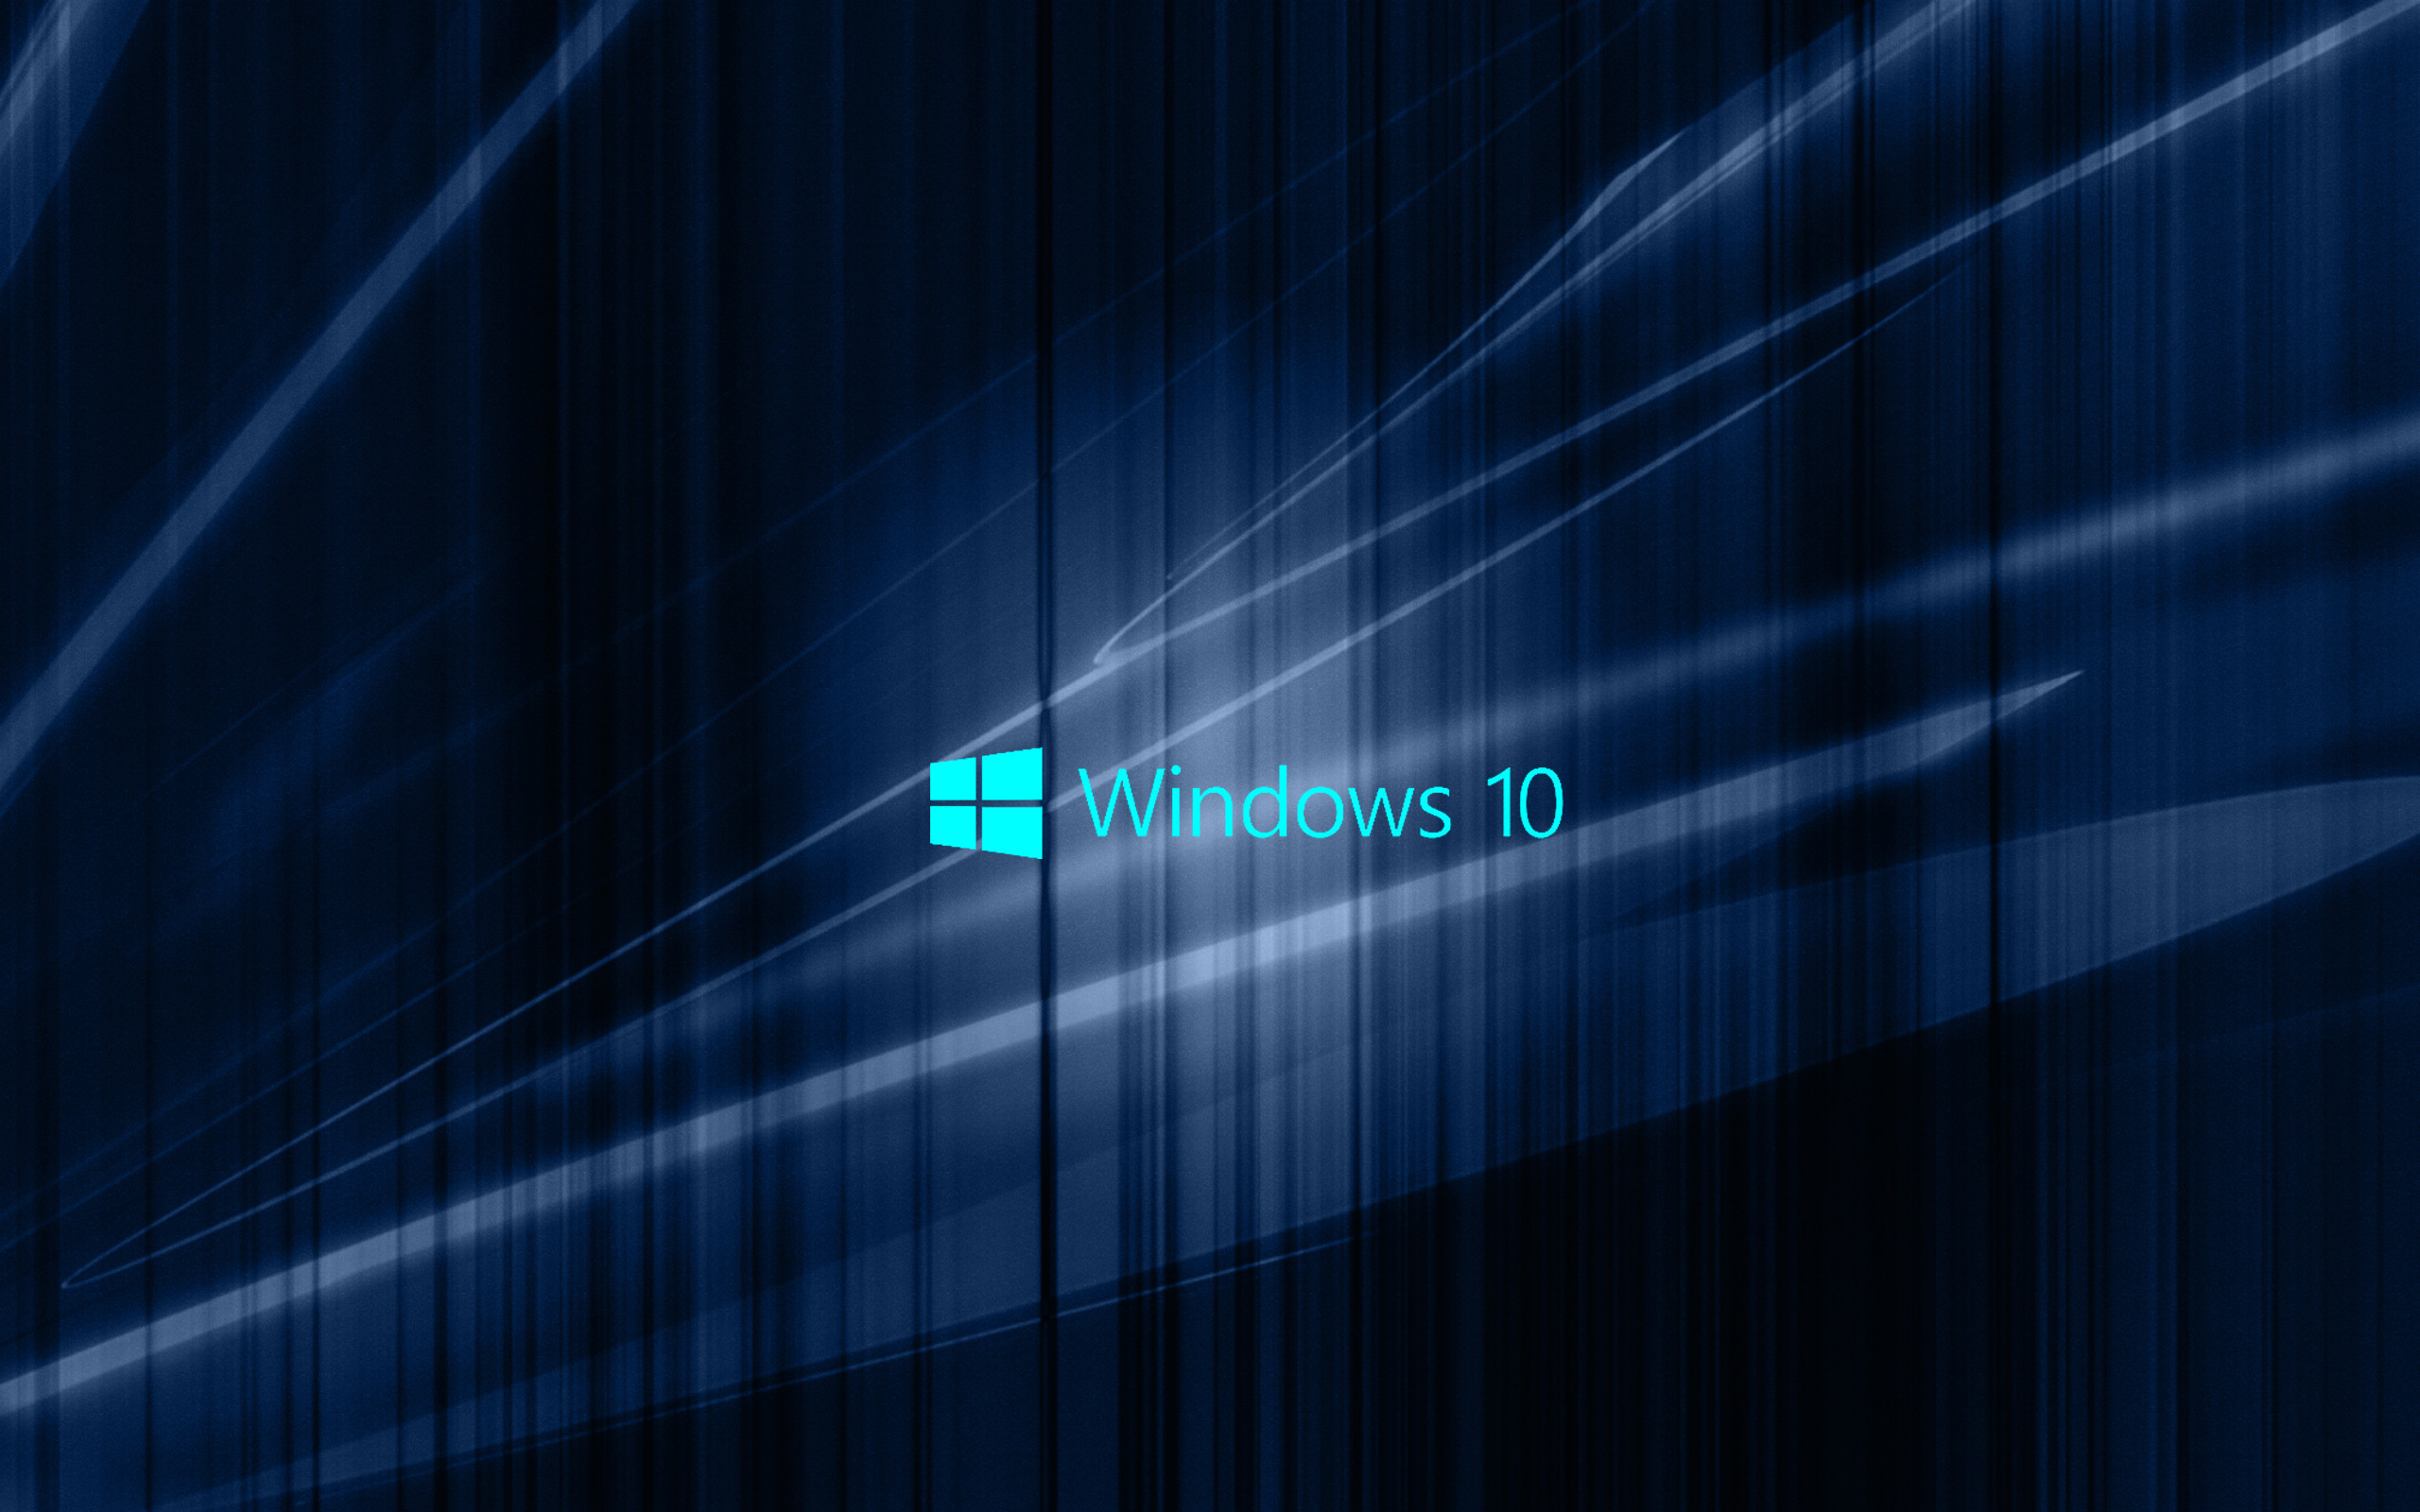 Windows 10 Wallpaper with Blue Abstract Waves | HD Wallpapers for Free